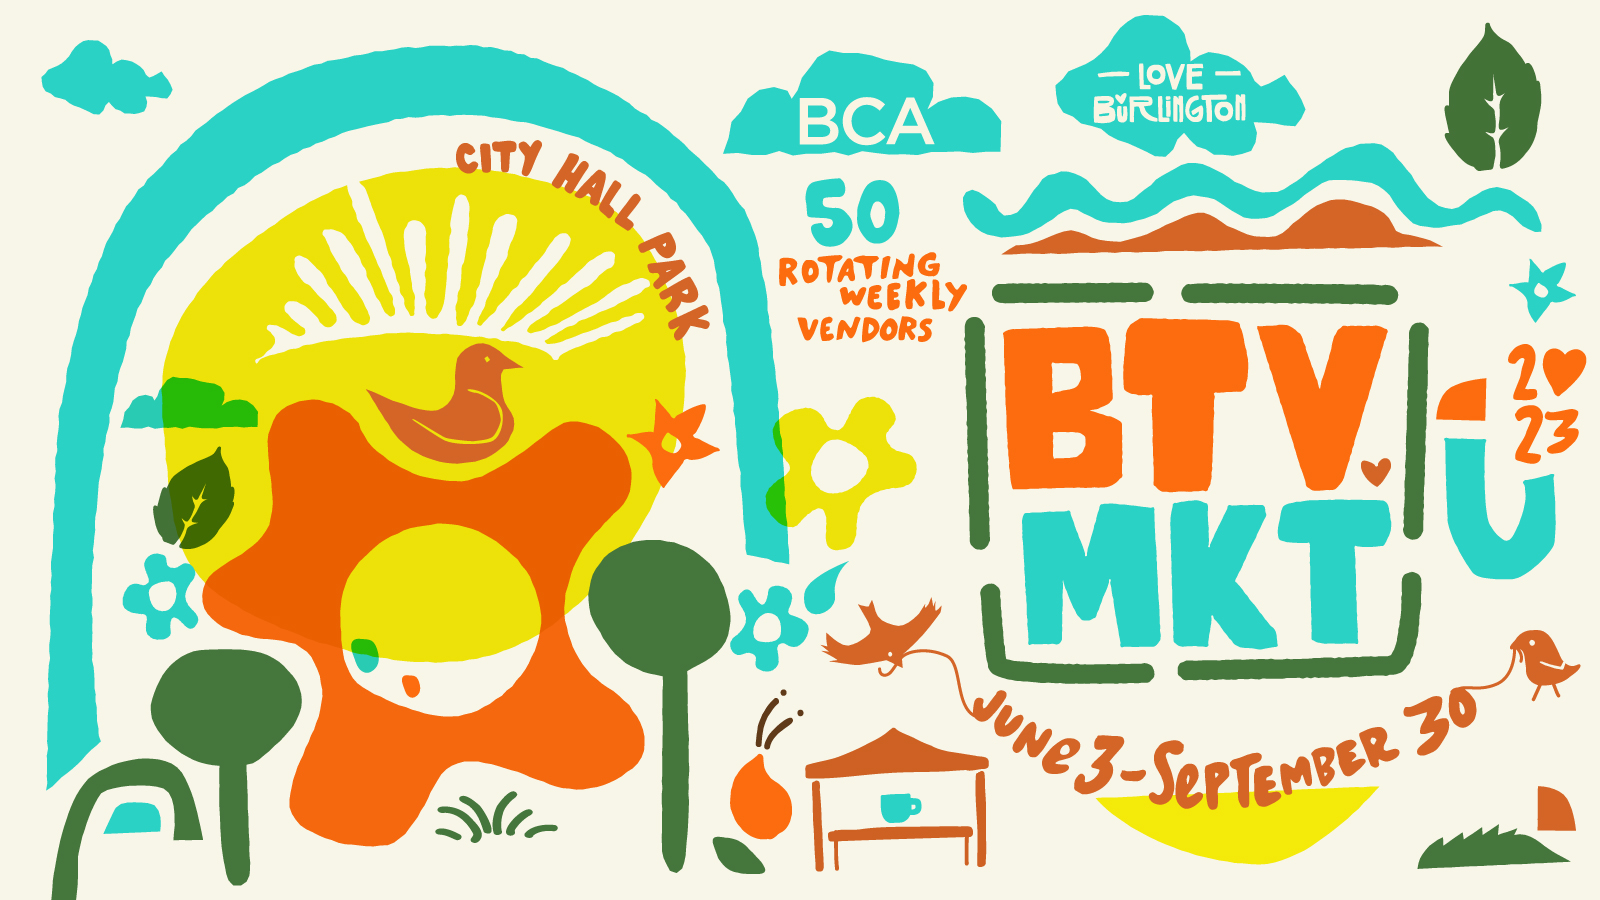 BCA Love Burlington BTV Market 50 Rotating Weekly Vendors June 3 - September 30  City Hall Park with illustrated graphics done in a simplified 1970s style of tree, leaves, clouds, birds, flowers, and tents with abstract squiggles and curvilinear forms all in aqua, orange, yellow, and green